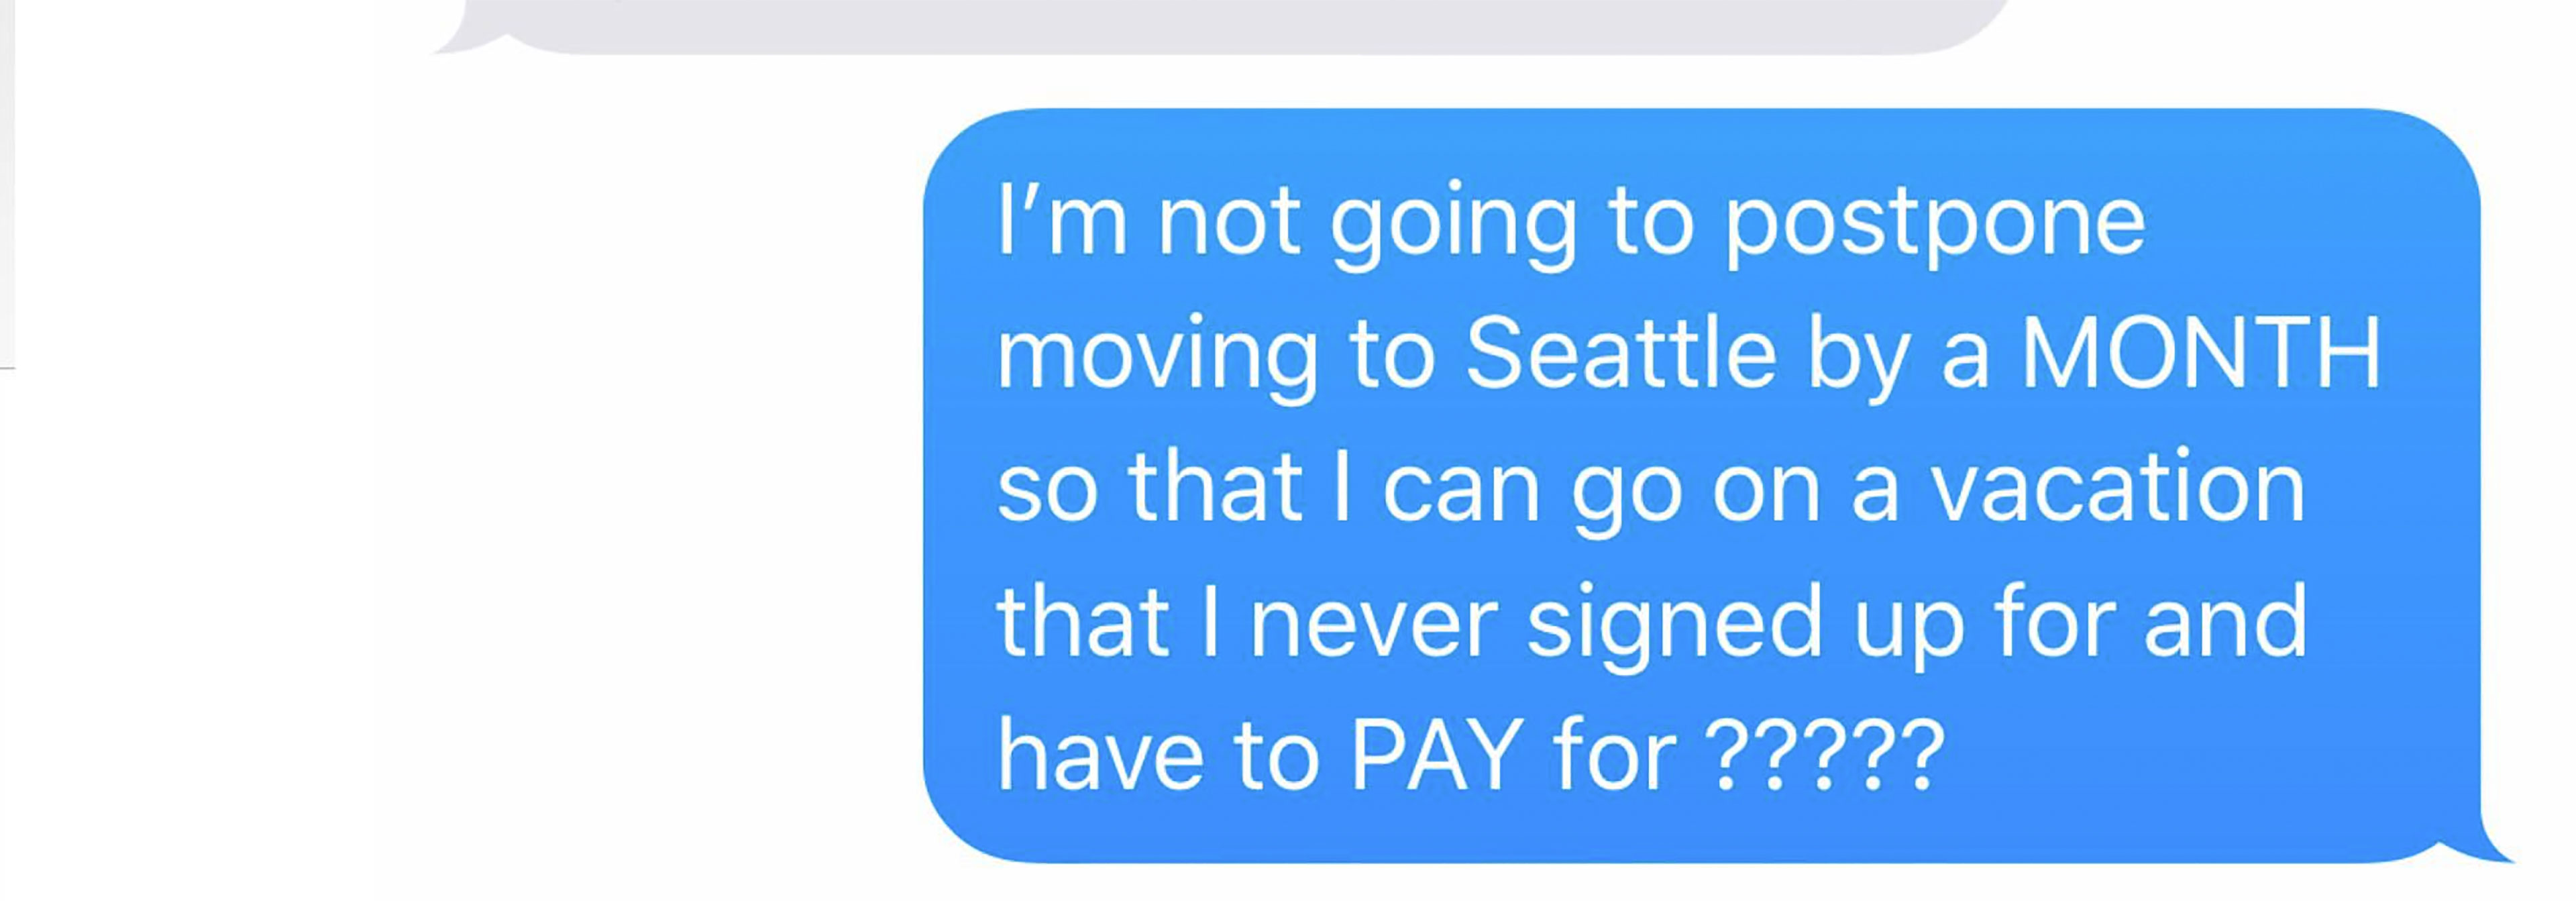 flying type - I'm not going to postpone moving to Seattle by a Month so that I can go on a vacation that I never signed up for and have to Pay for ?????